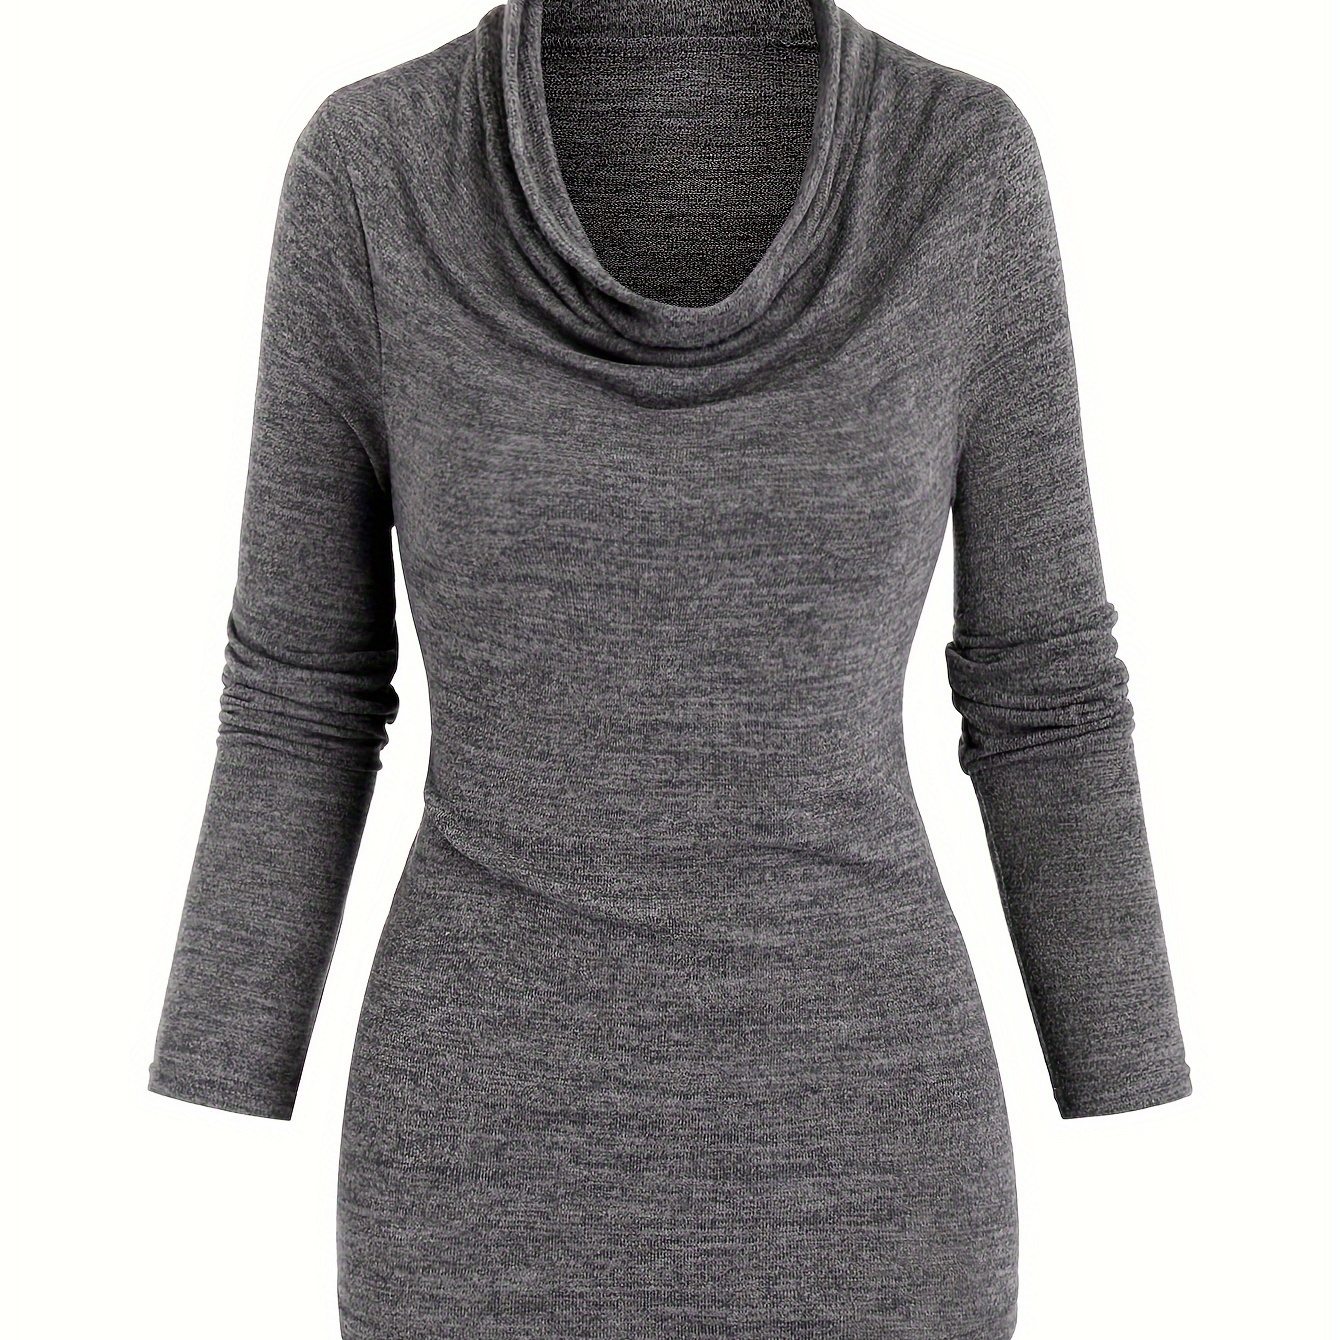 

Solid Cowl Neck Simple T-shirt, Versatile Long Sleeve T-shirt For Spring & Fall, Women's Clothing